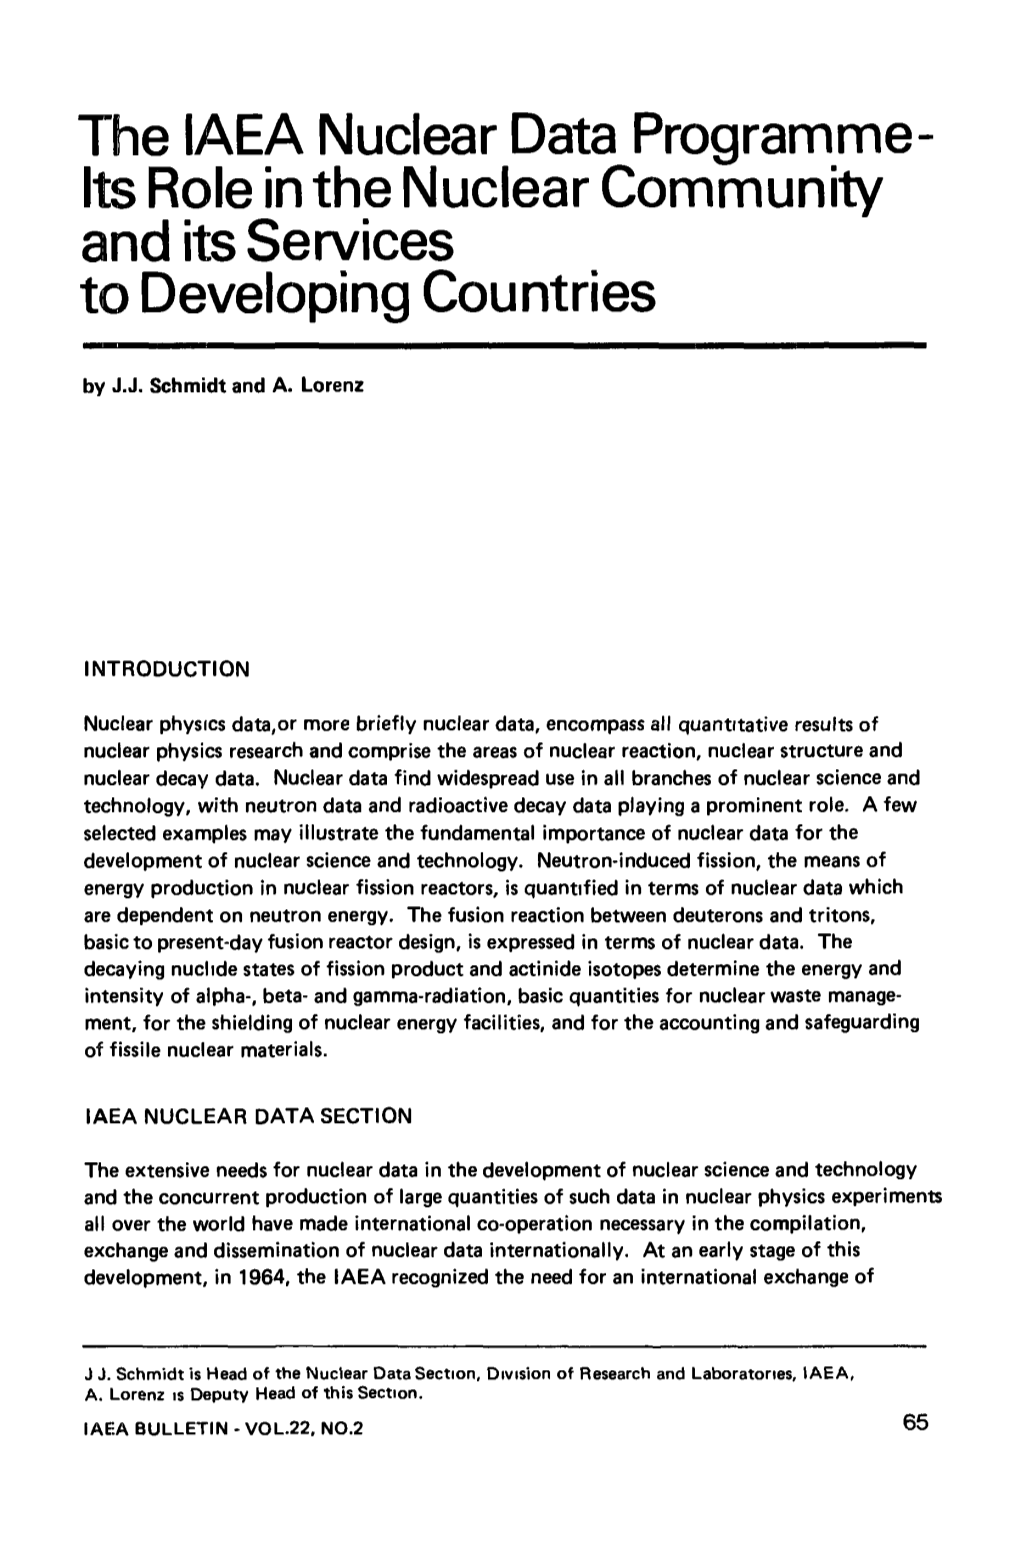 The IAEA Nuclear Data Programme Its Role in the Nuclear Community and Its Services to Developing Countries by J.J